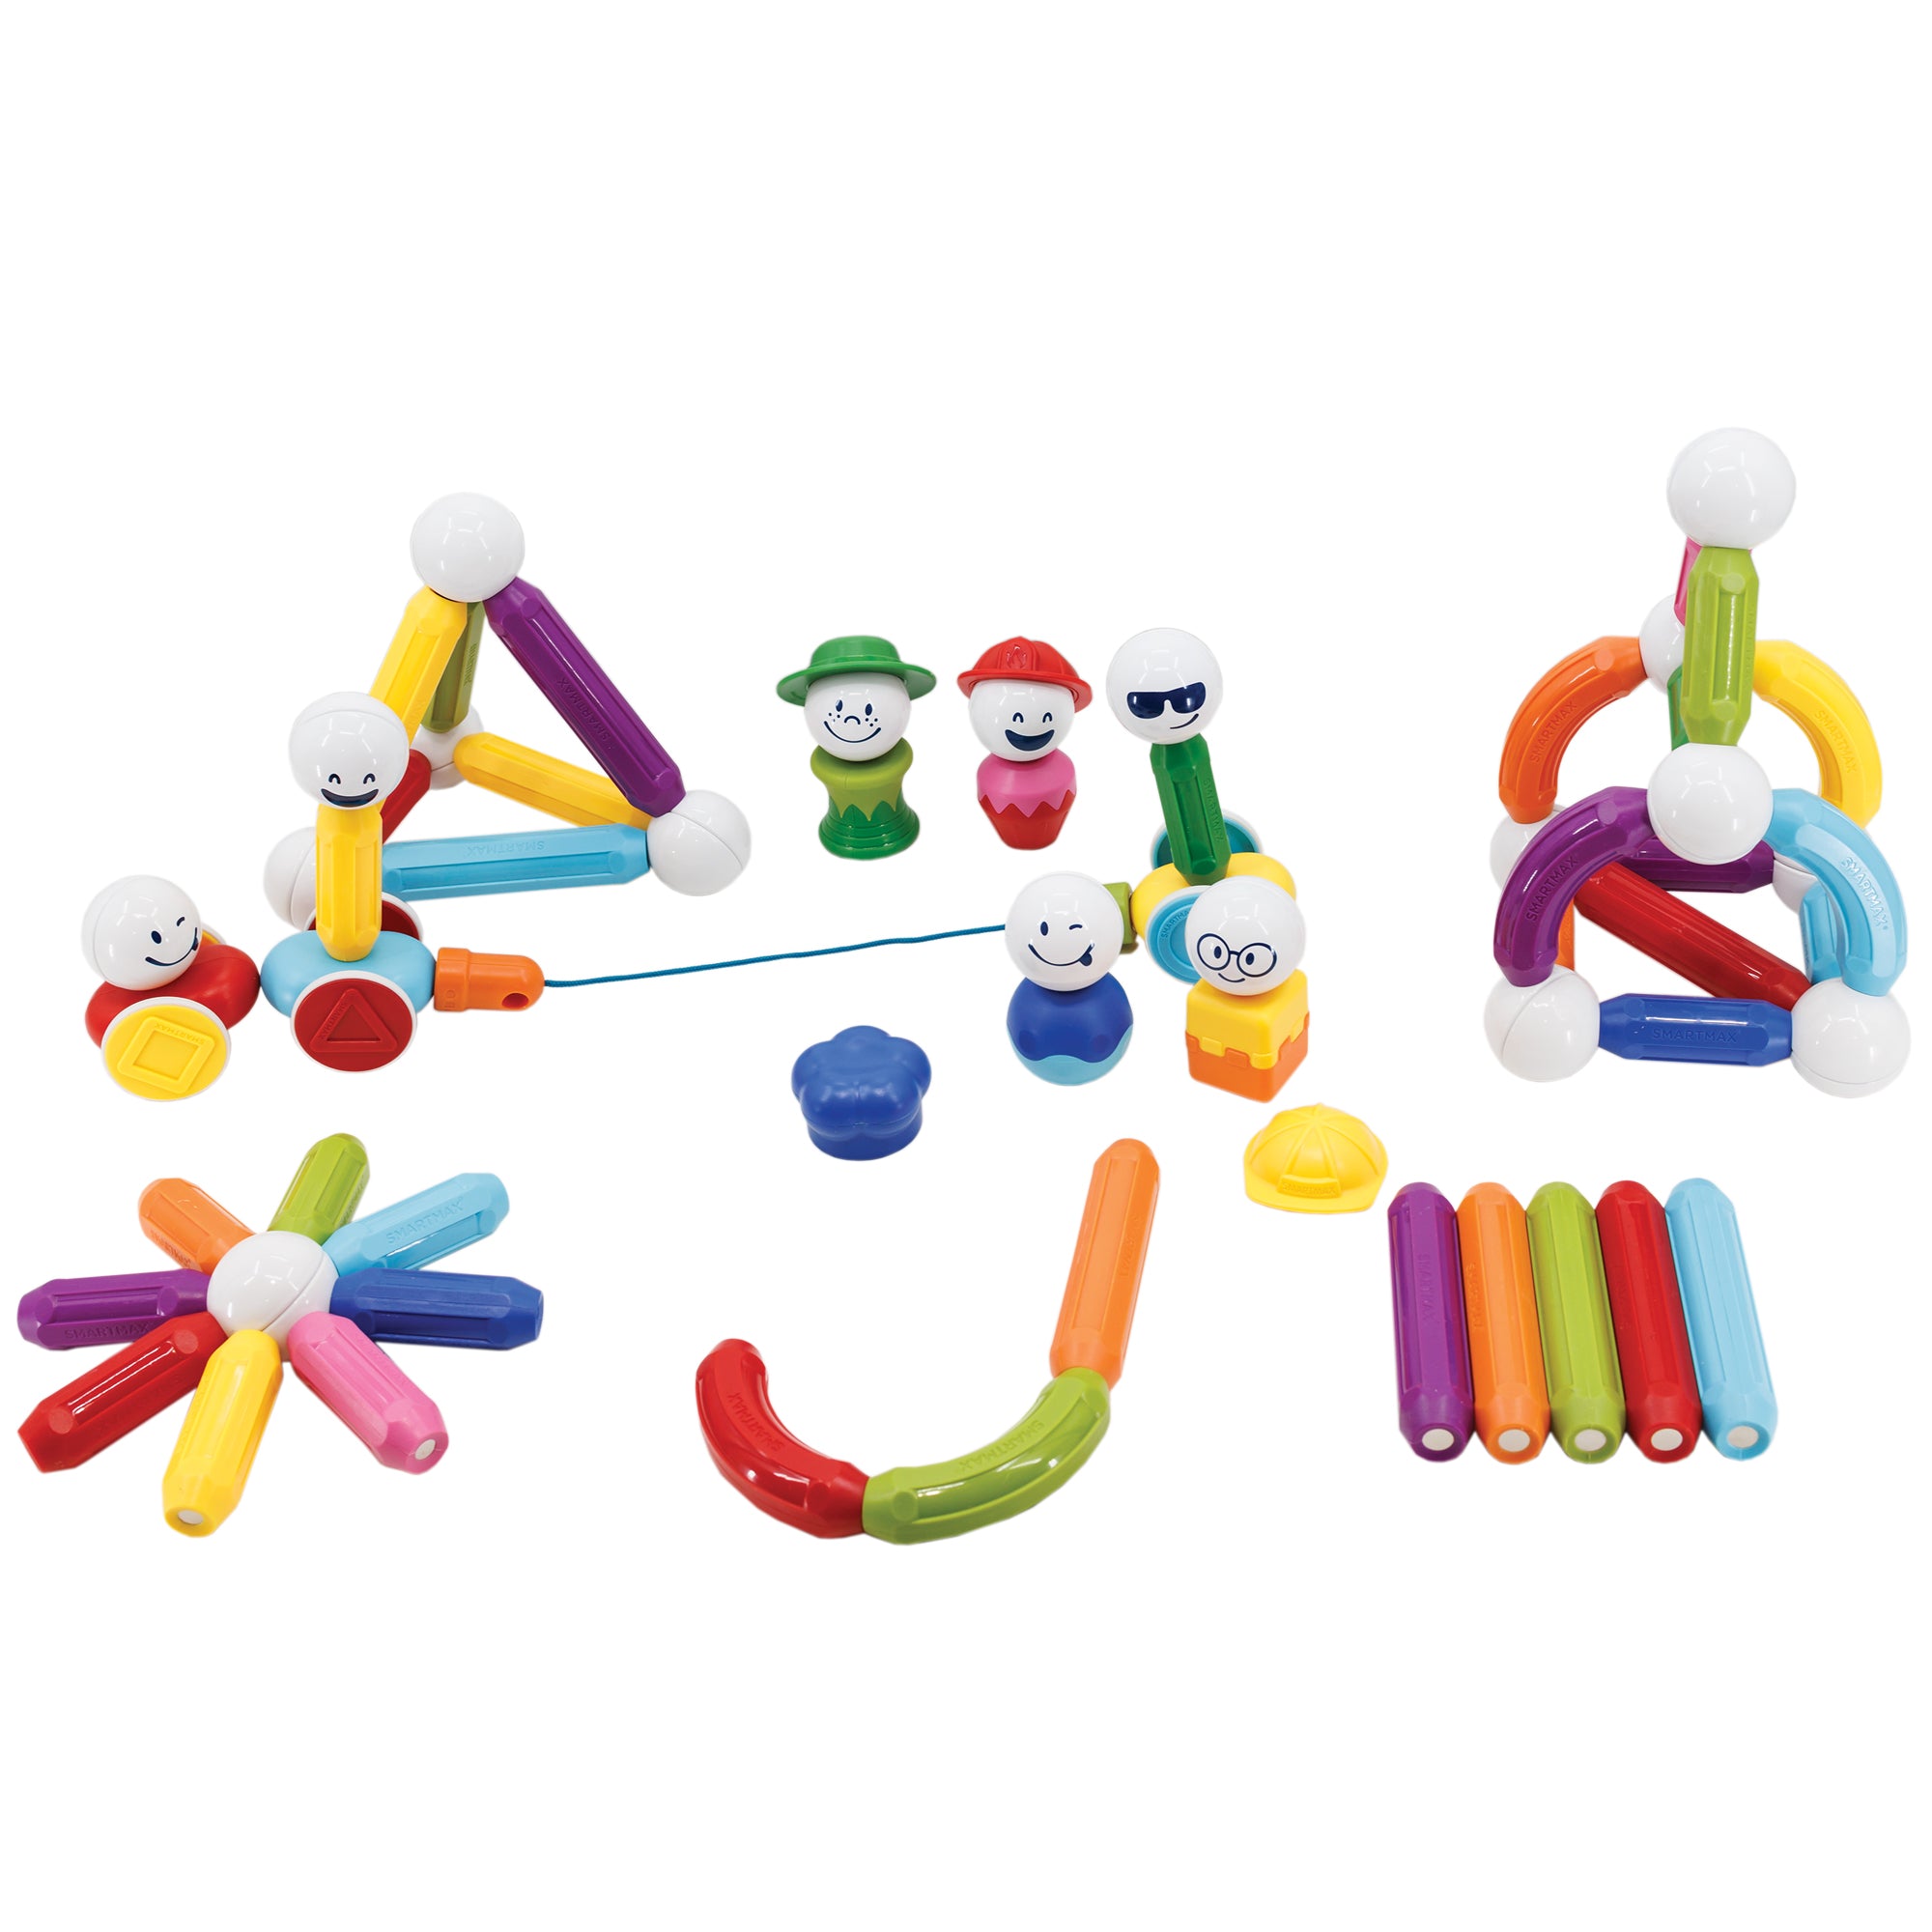 Have a Little Builder? They'll LOVE this SmartMax Magnetic Building Set!